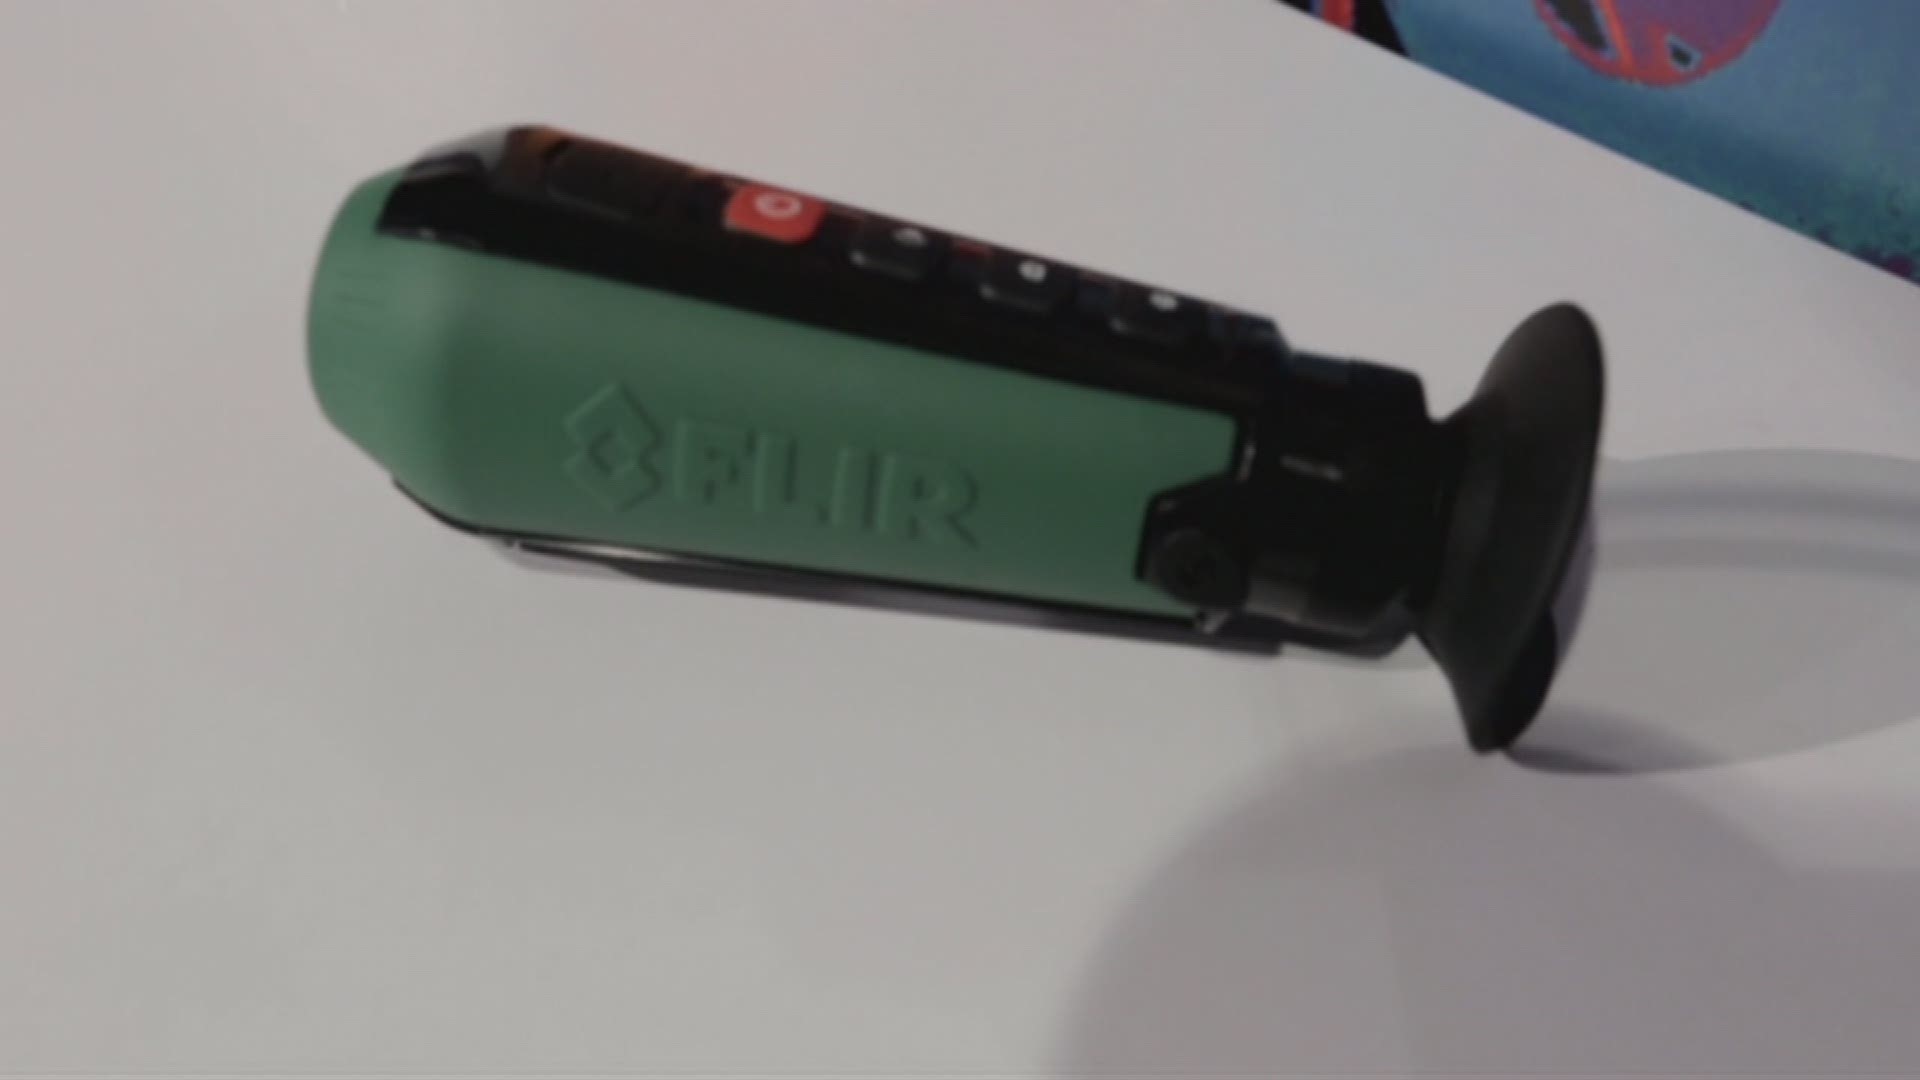 Portland's Flir Systems at the 2016 Consumer Electronics Show